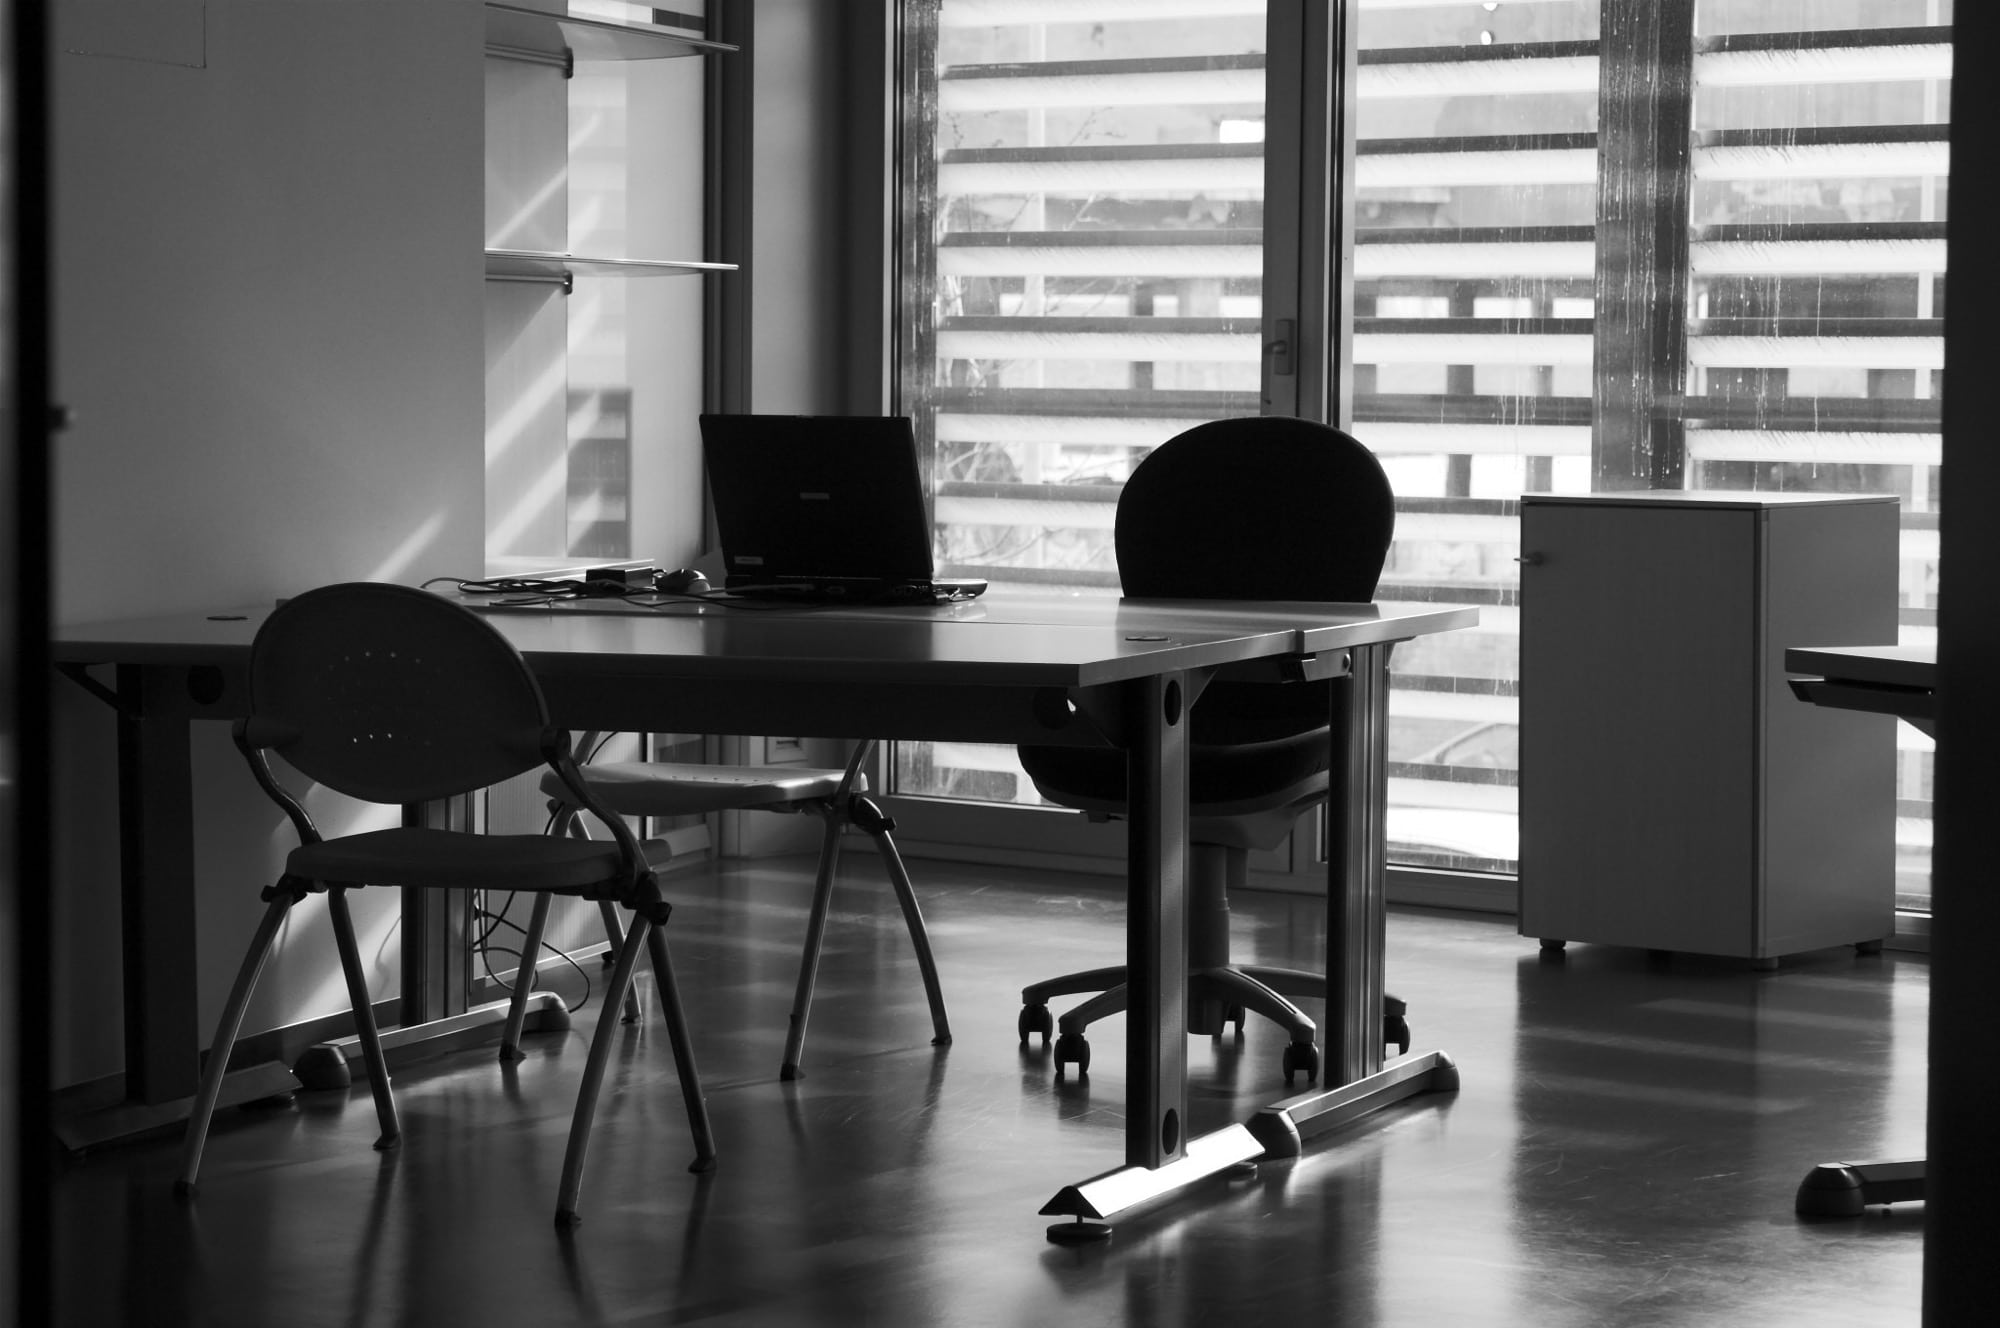 photo of empty desk representing time lost to meaningless meetings